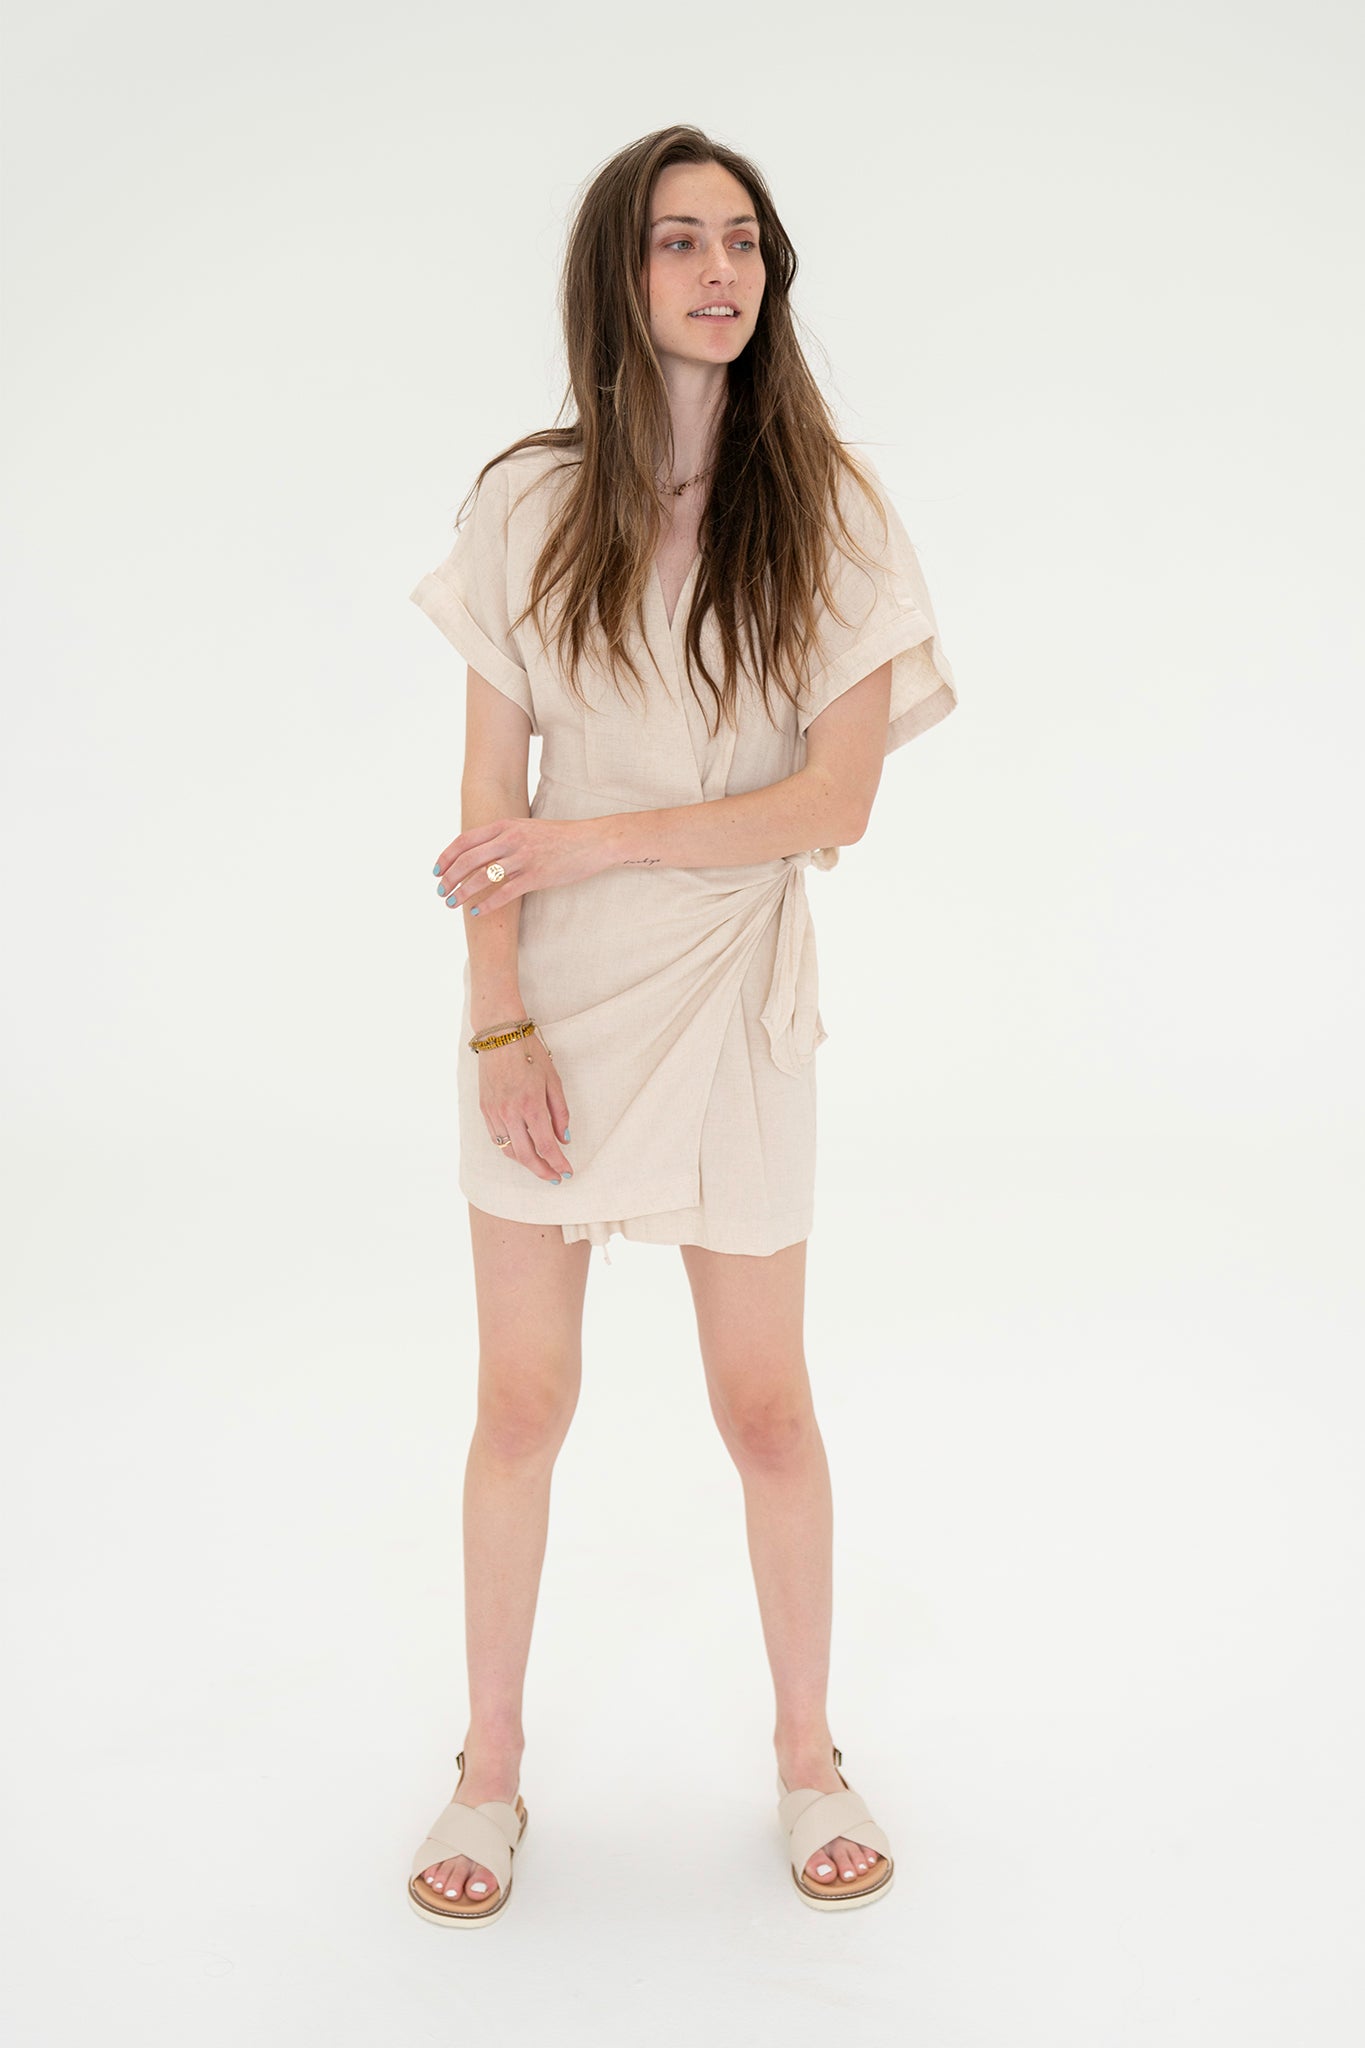 View 1 of Hein Wrap Dress, a Dresses from Larrea Cove. Detail: The Hein Wrap Dress is a good neutral summer dress.